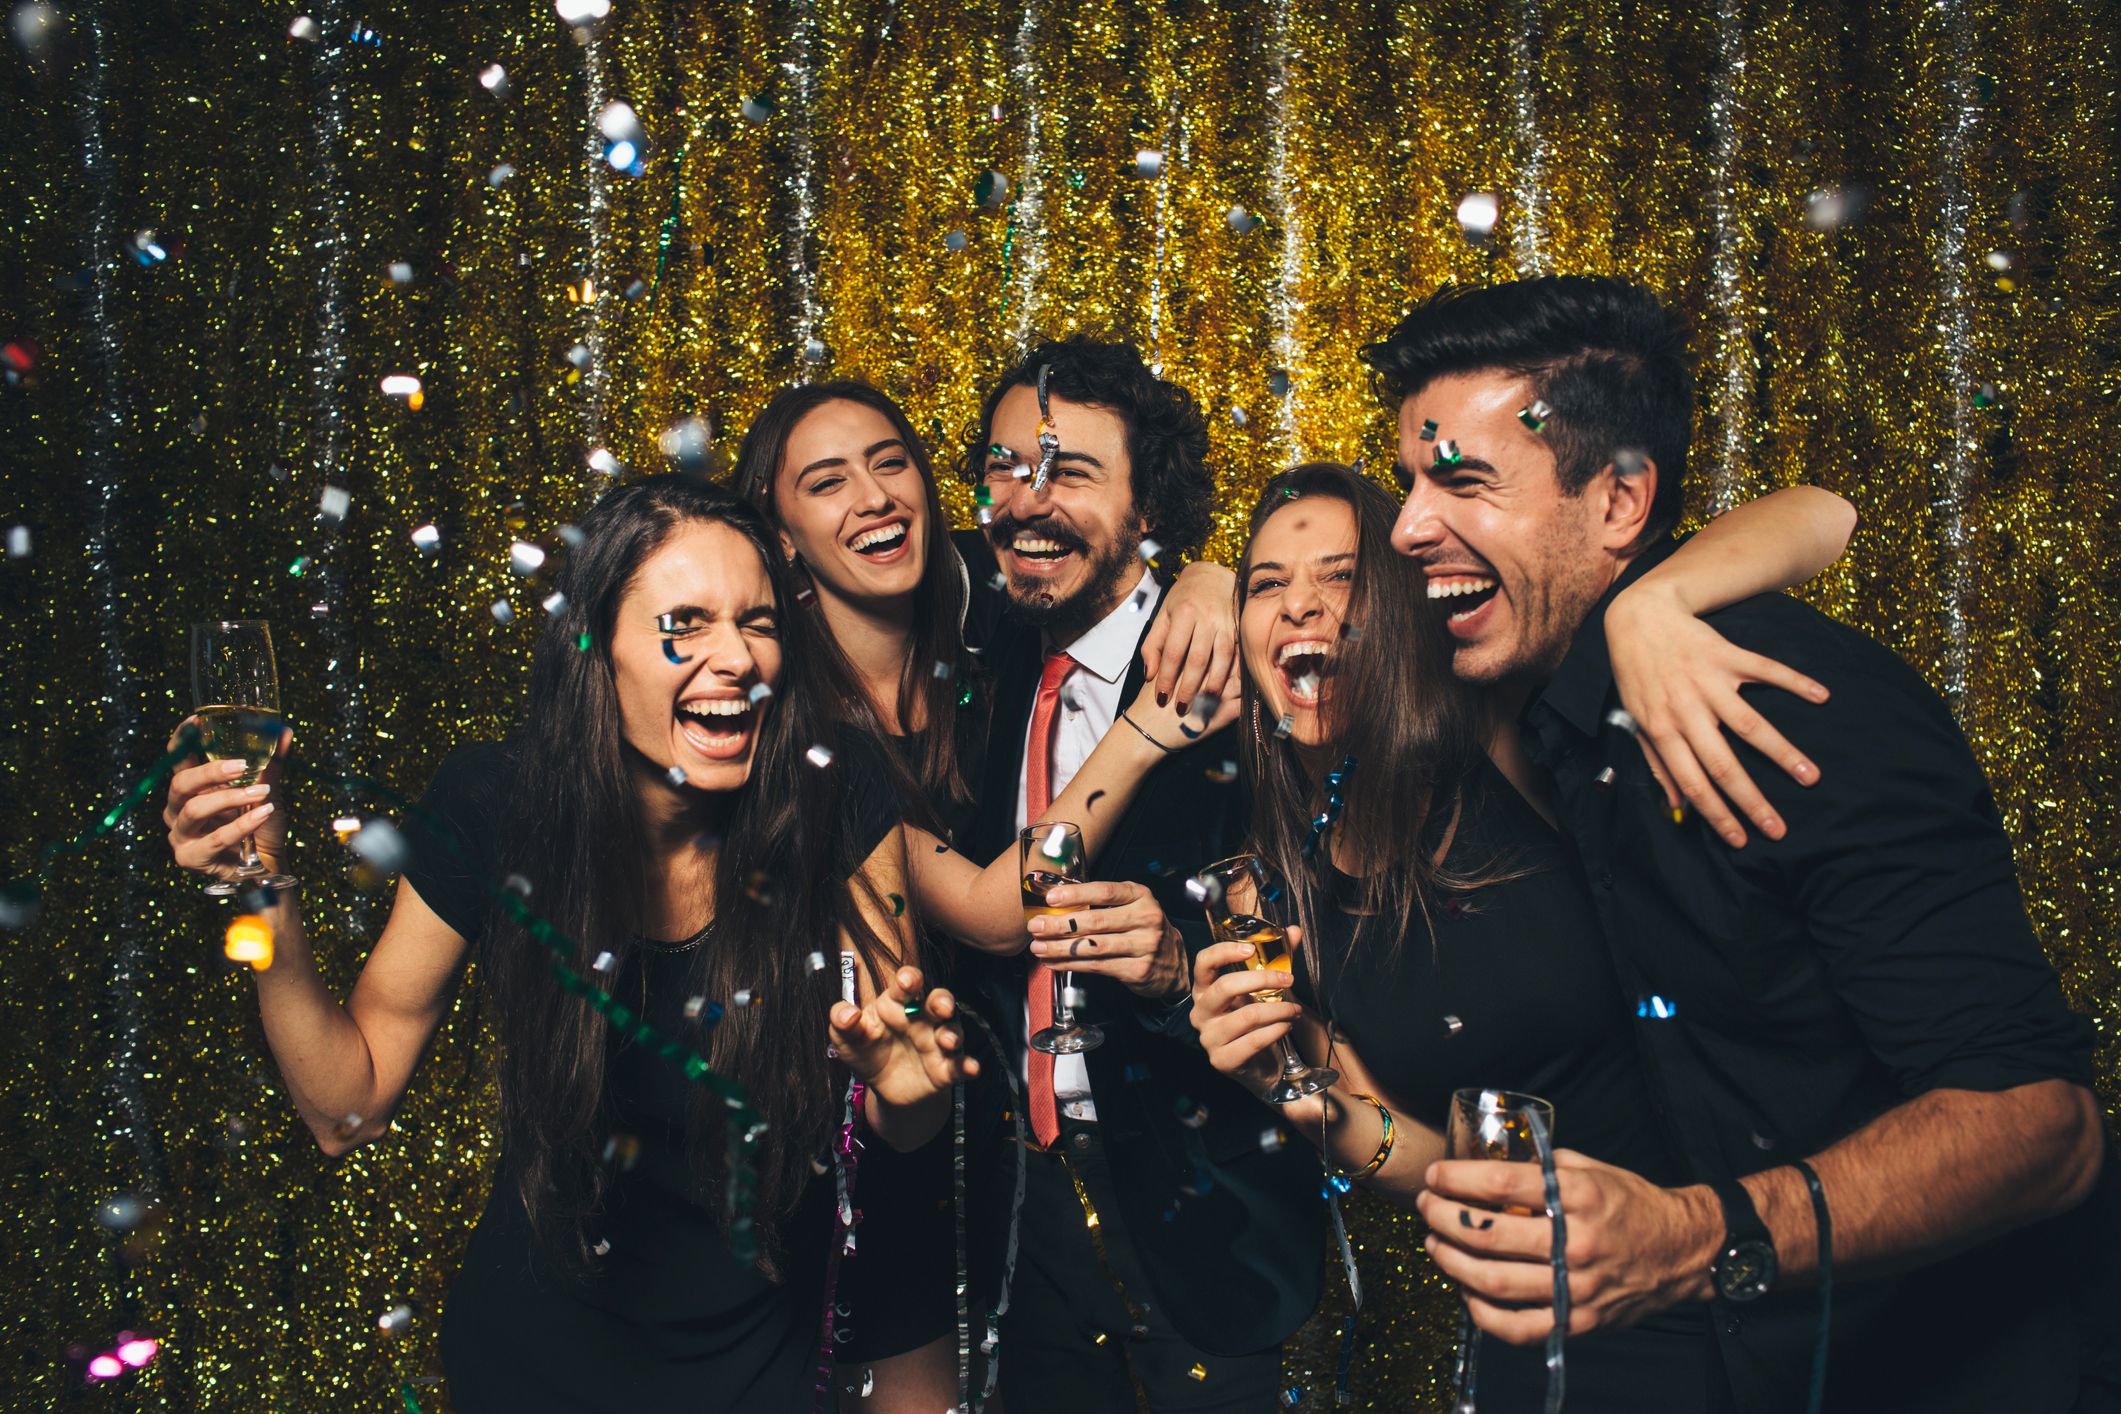 new-year-party-royalty-free-image-495479466-1541453010.jpg